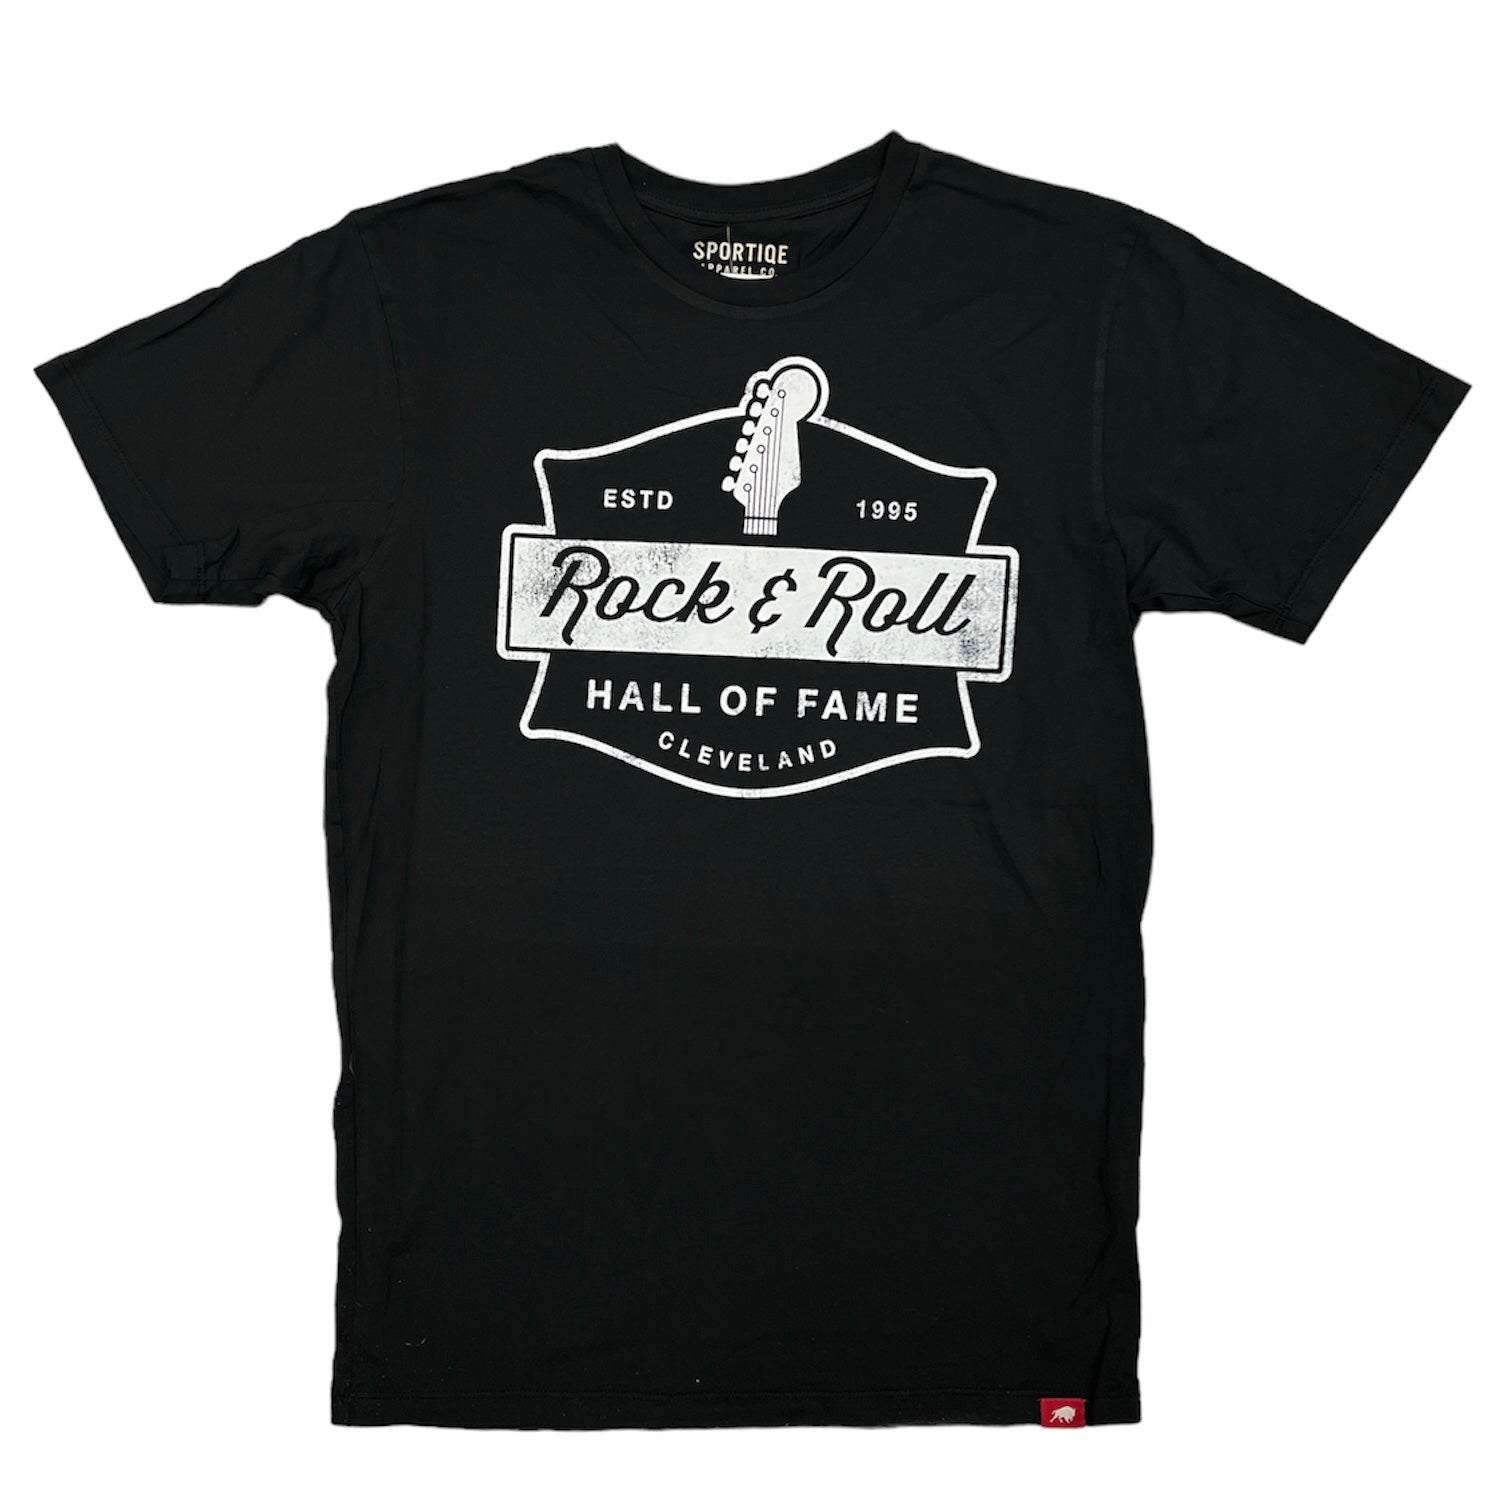 ROCK AND ROLL HALL OF FAME - ROCK HALL APPAREL – Rock Hall Shop